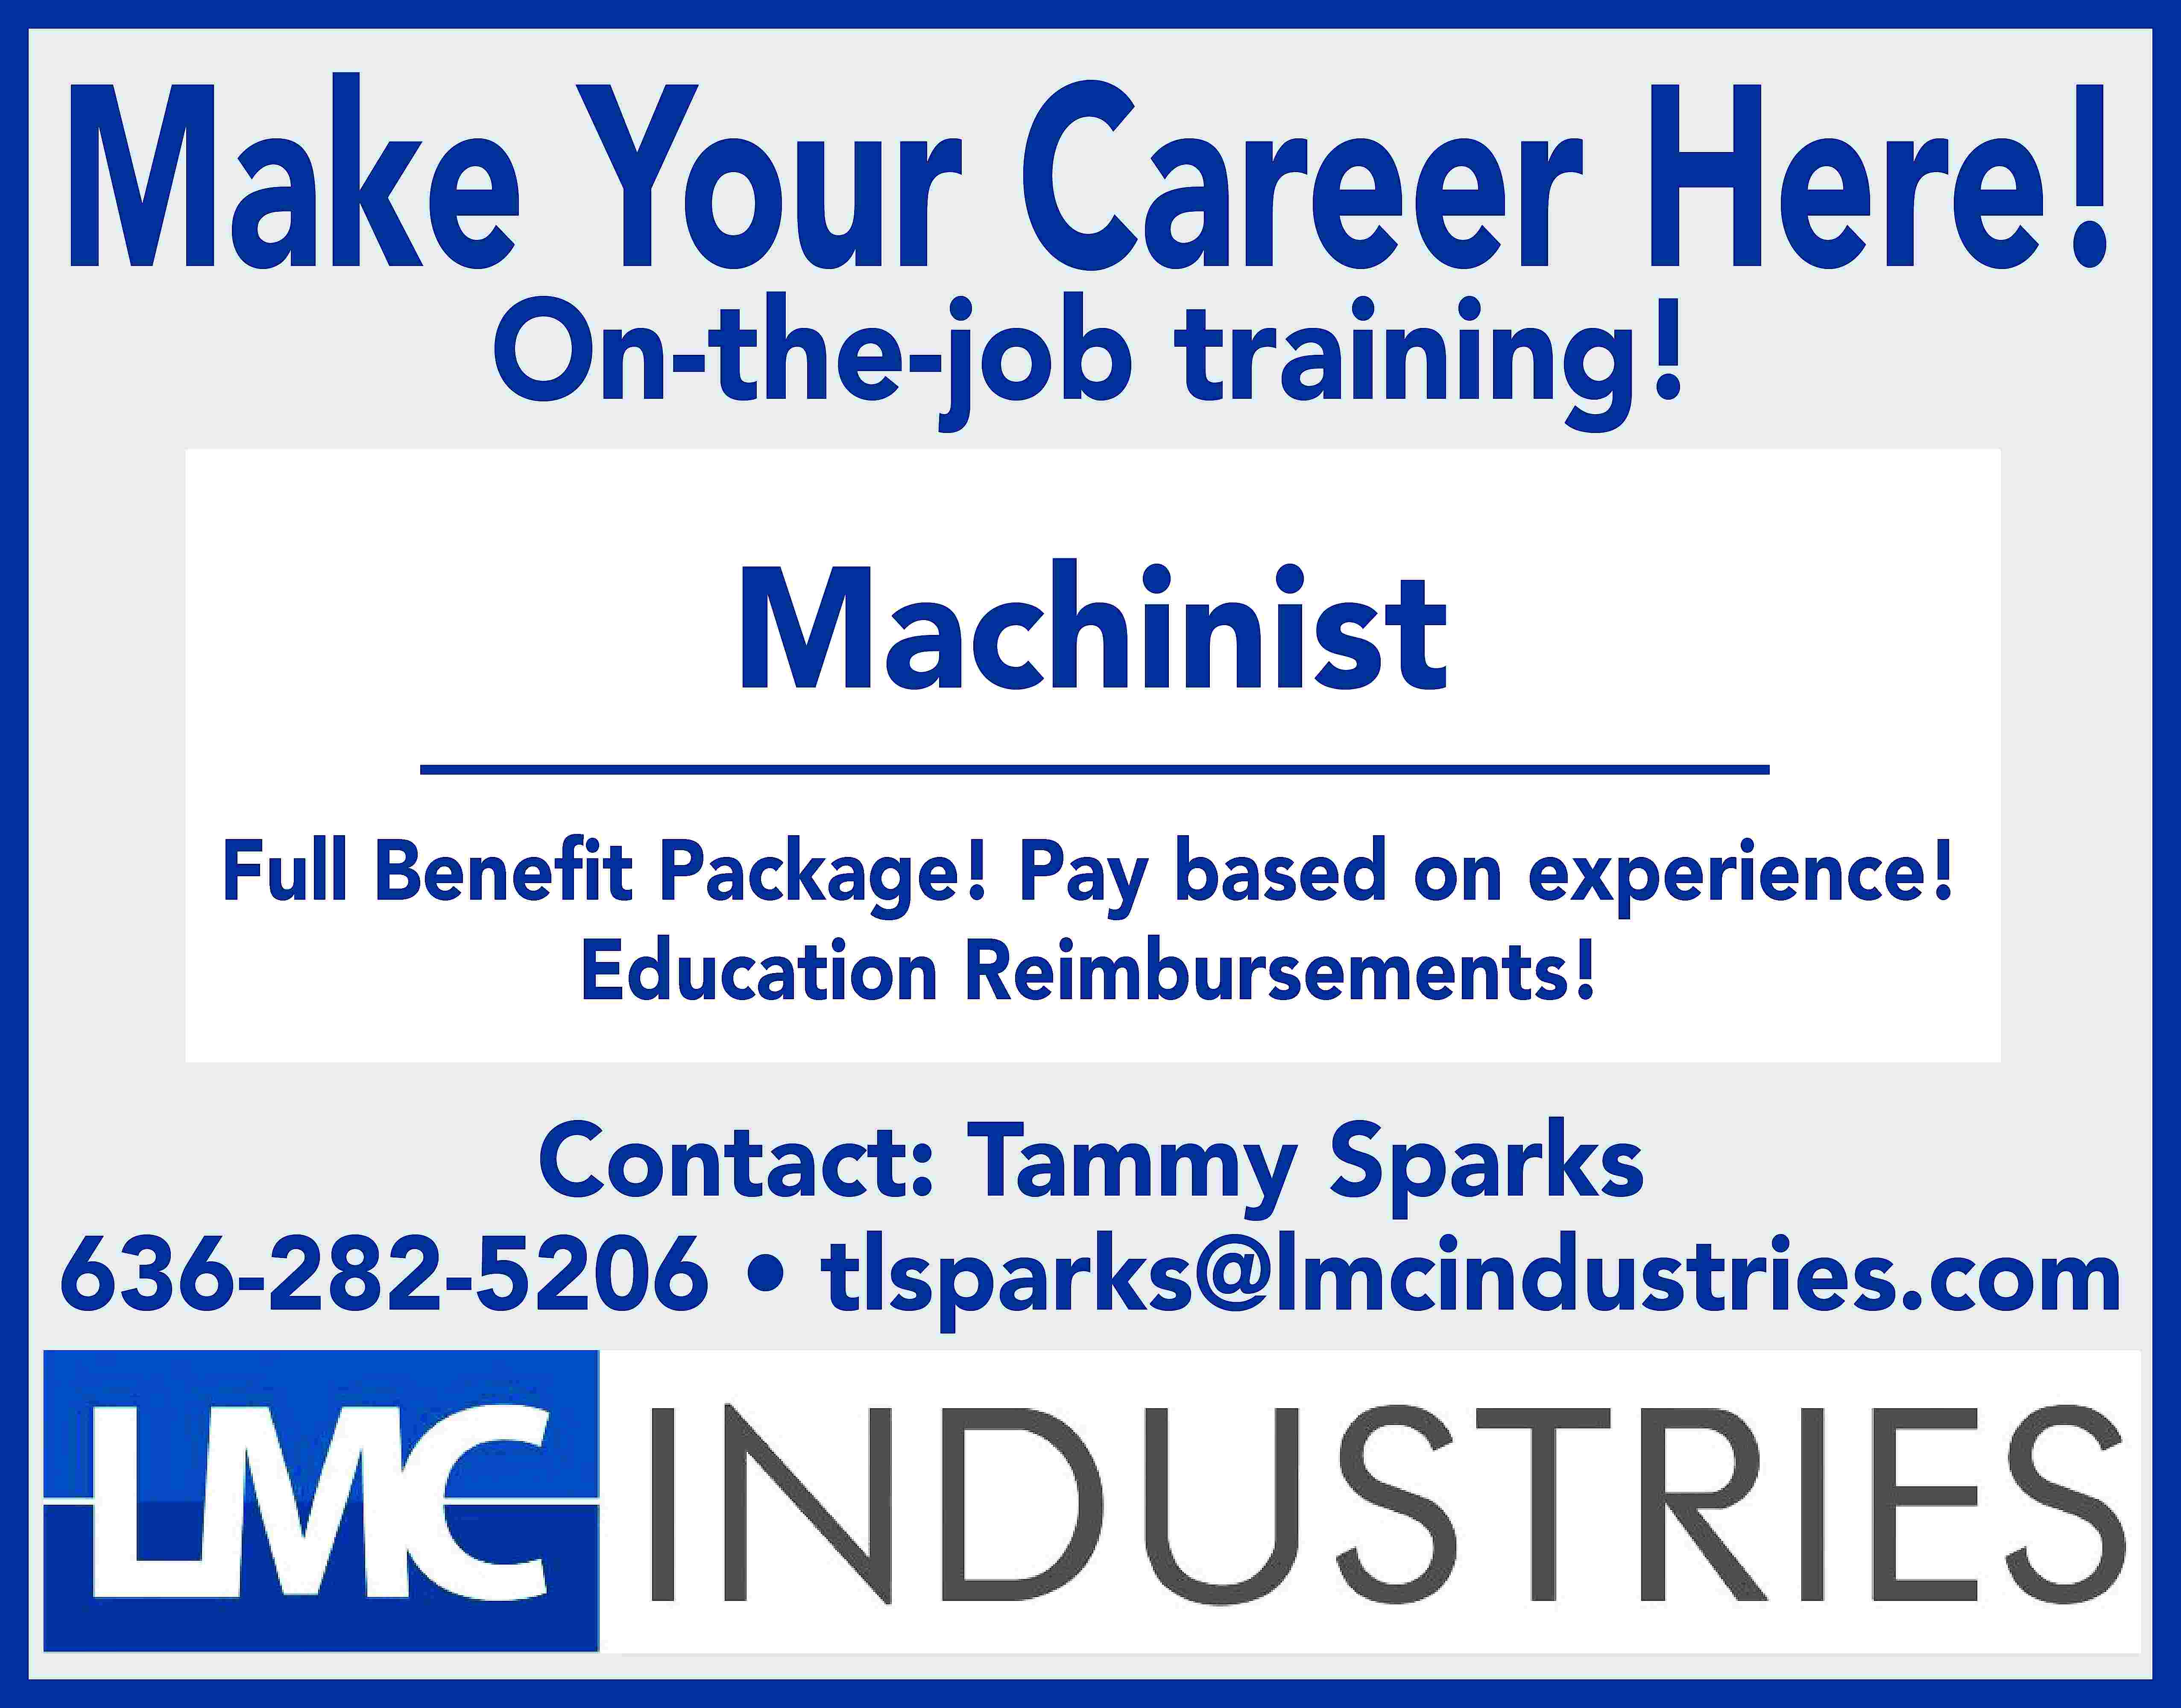 Make Your Career Here! On-the-job  Make Your Career Here! On-the-job training! Machinist Full Beneﬁt Package! Pay based on experience! Education Reimbursements! Contact: Tammy Sparks 636-282-5206 • tlsparks@lmcindustries.com